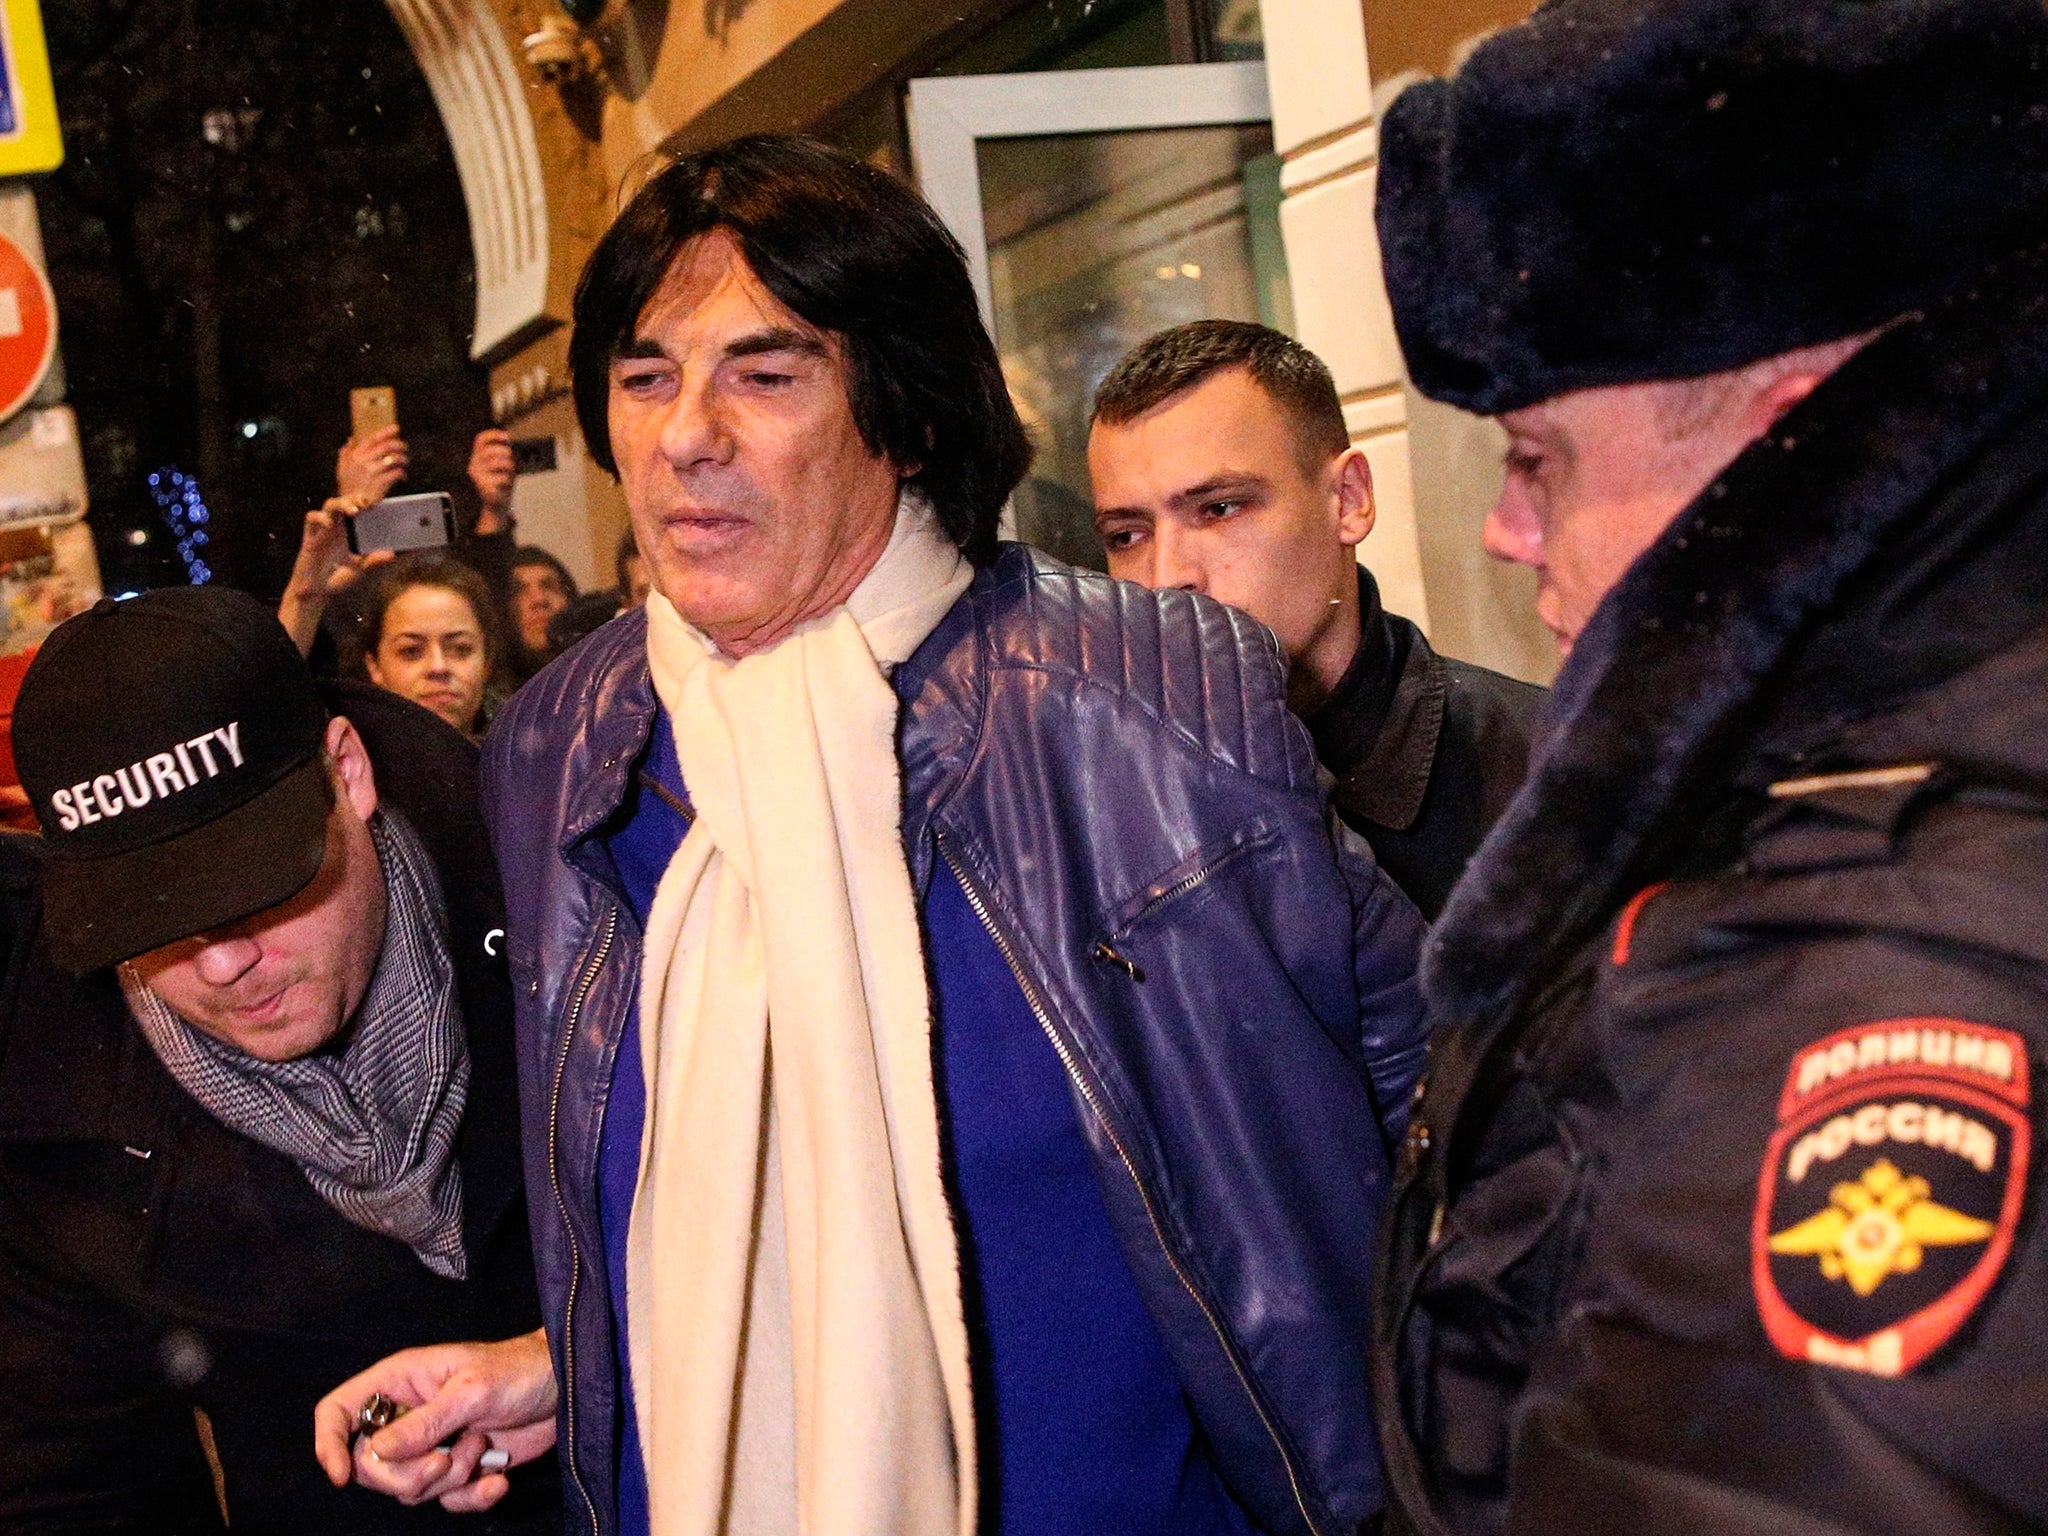 French composer Didier Marouani is detained by police outside a bank in Moscow